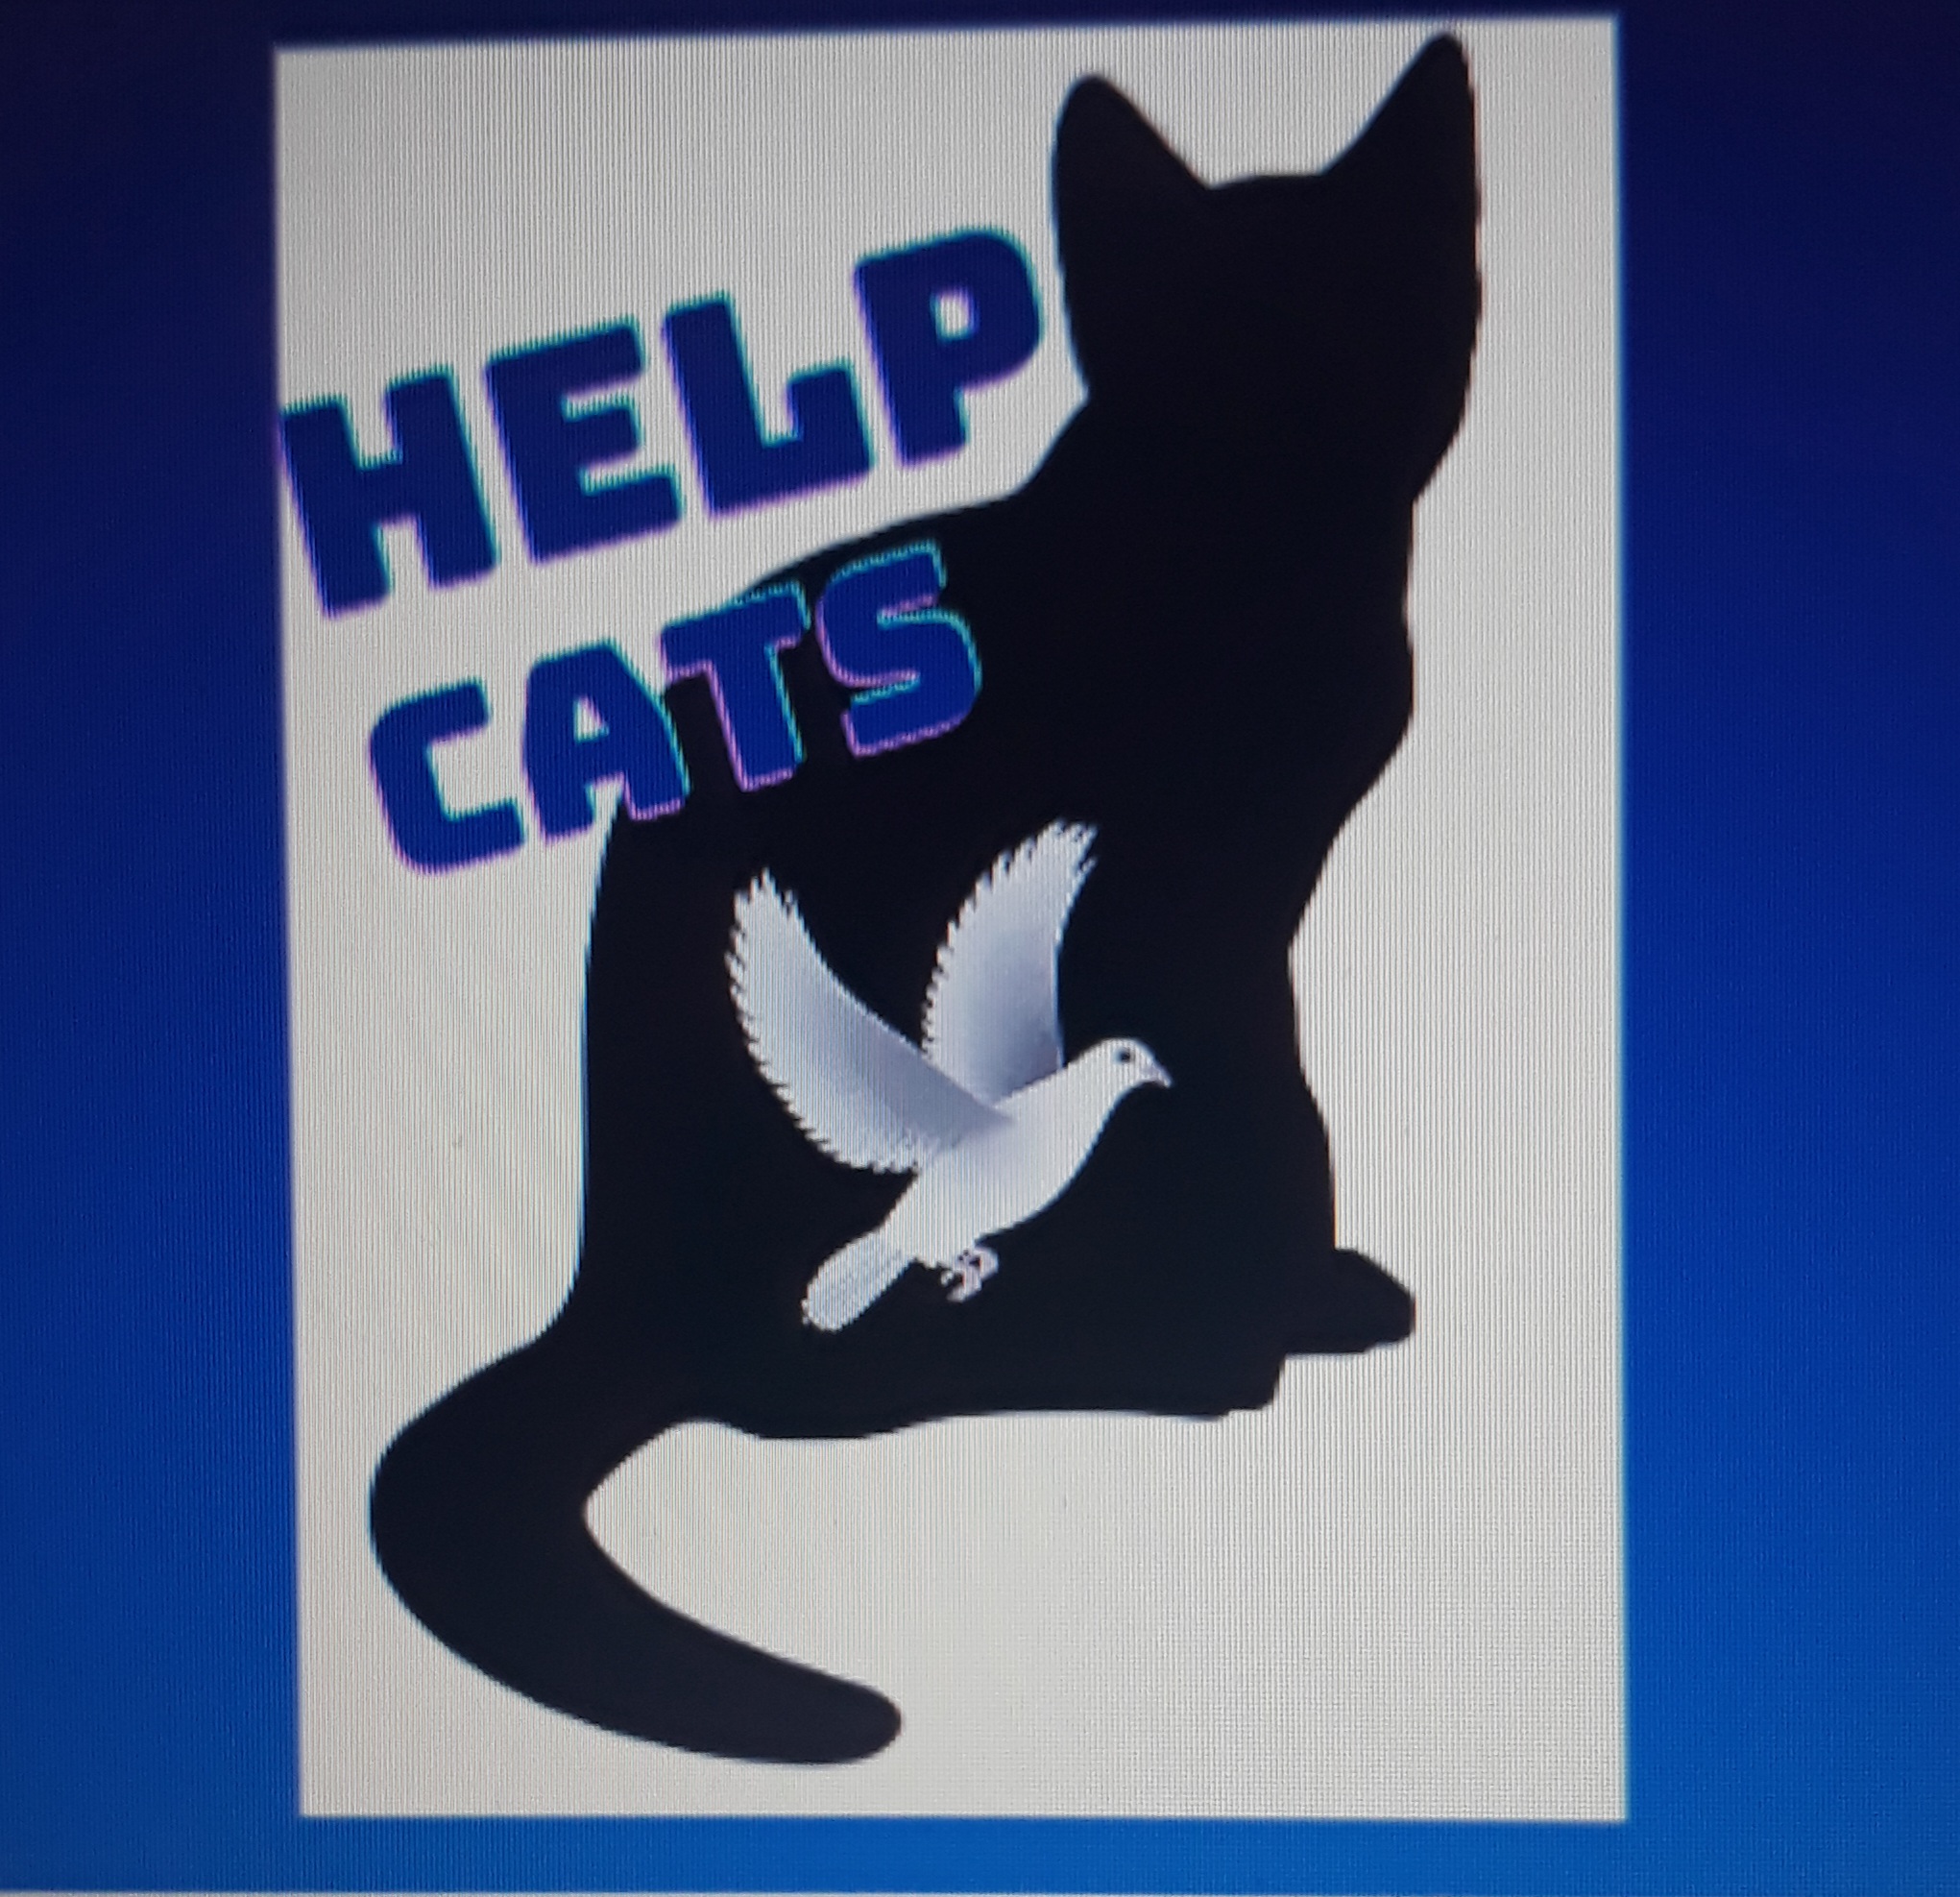 Help Cats